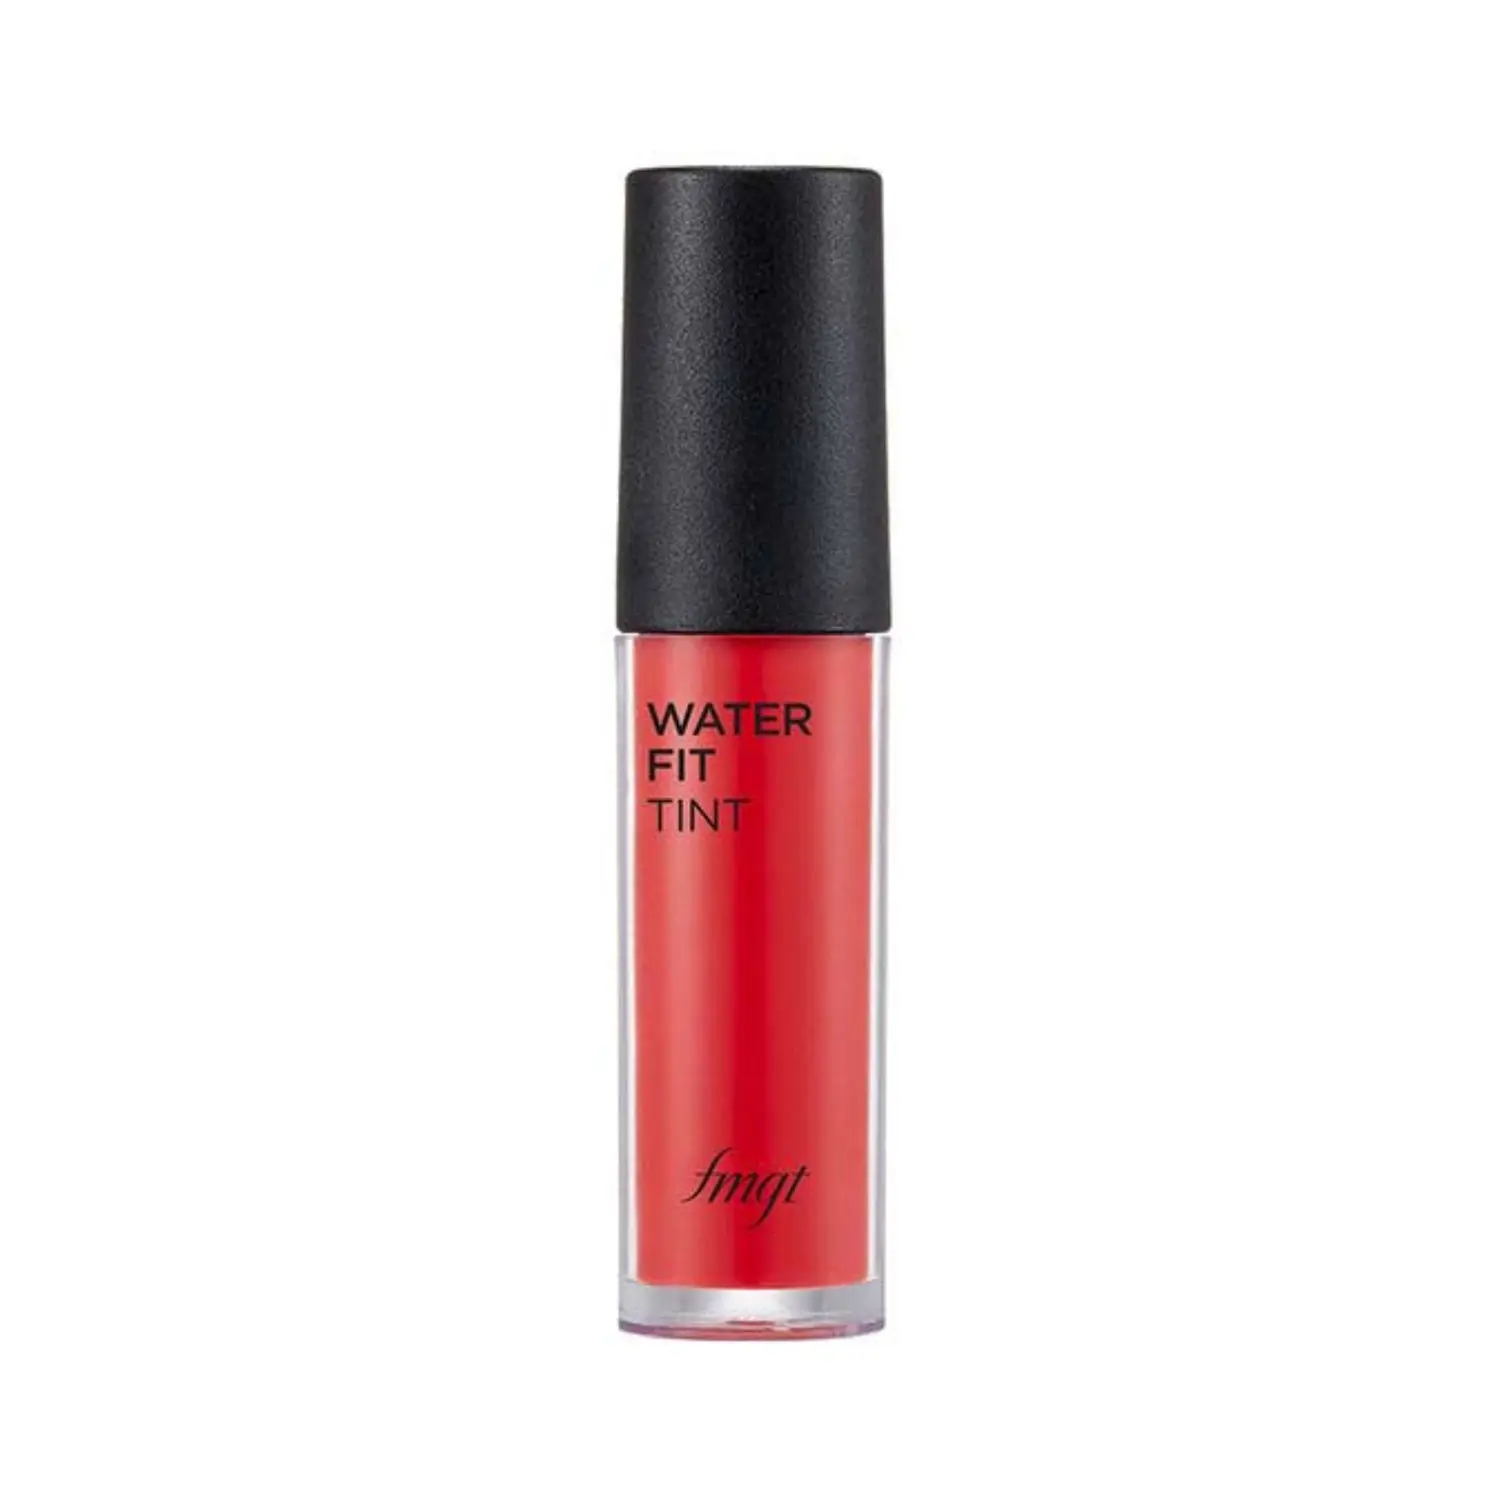 The Face Shop Water Fit Lip Tint - Pink Mate (5g)